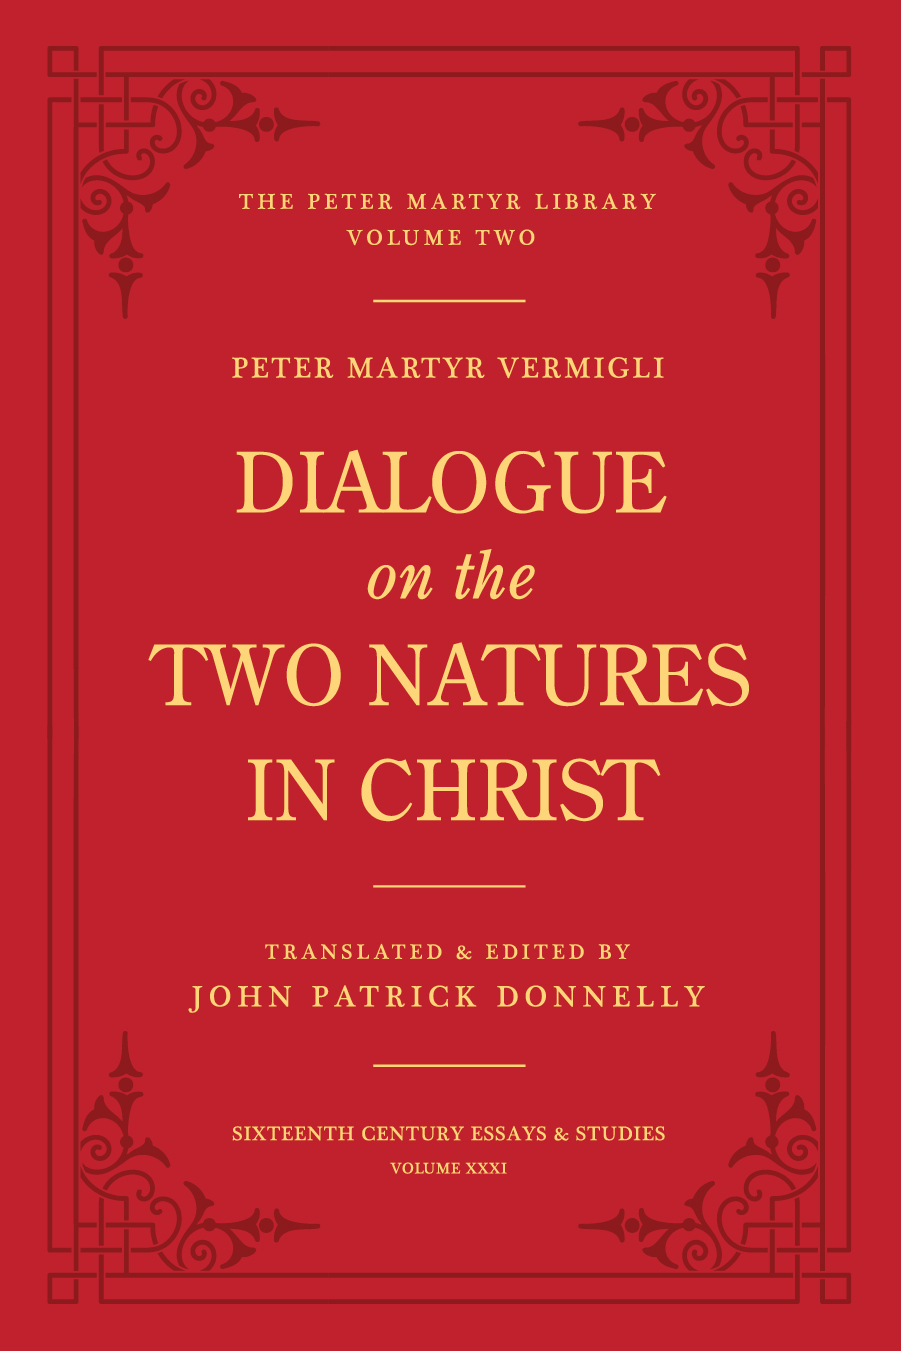 Volume 2 Dialogue on the Two Natures in Christ